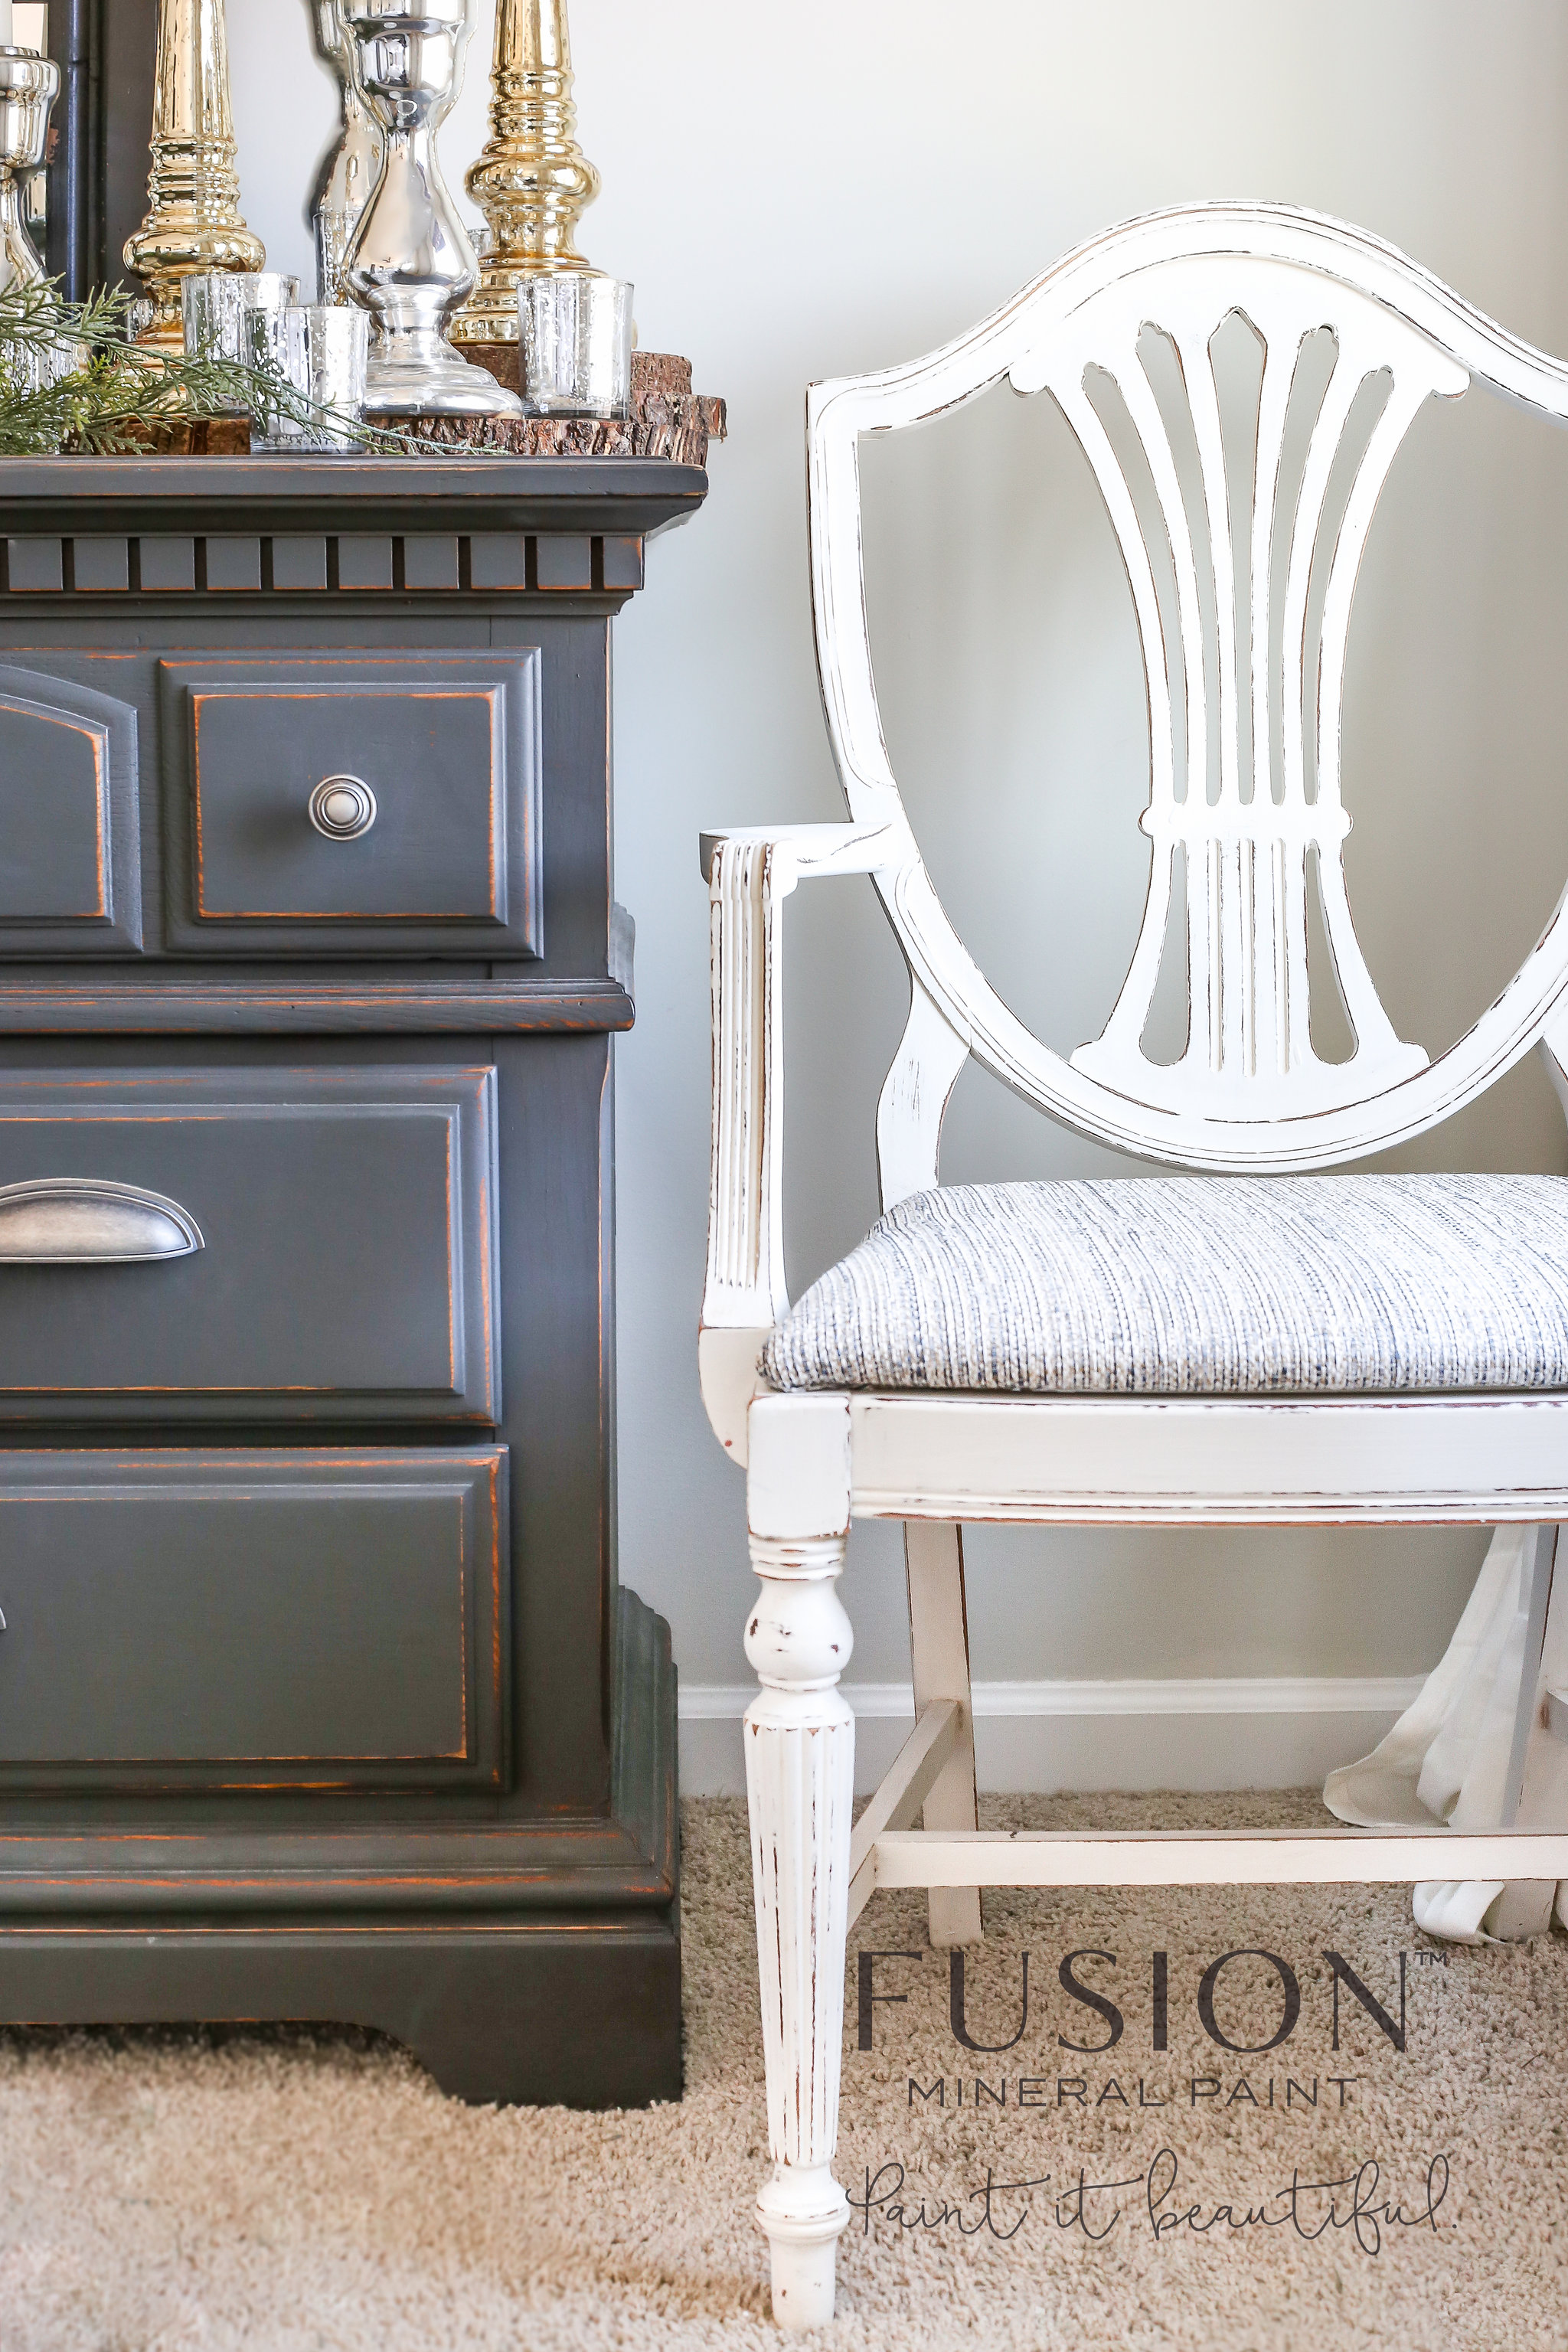 The 5 Basics Of Furniture Painting Fusion Mineral Paint